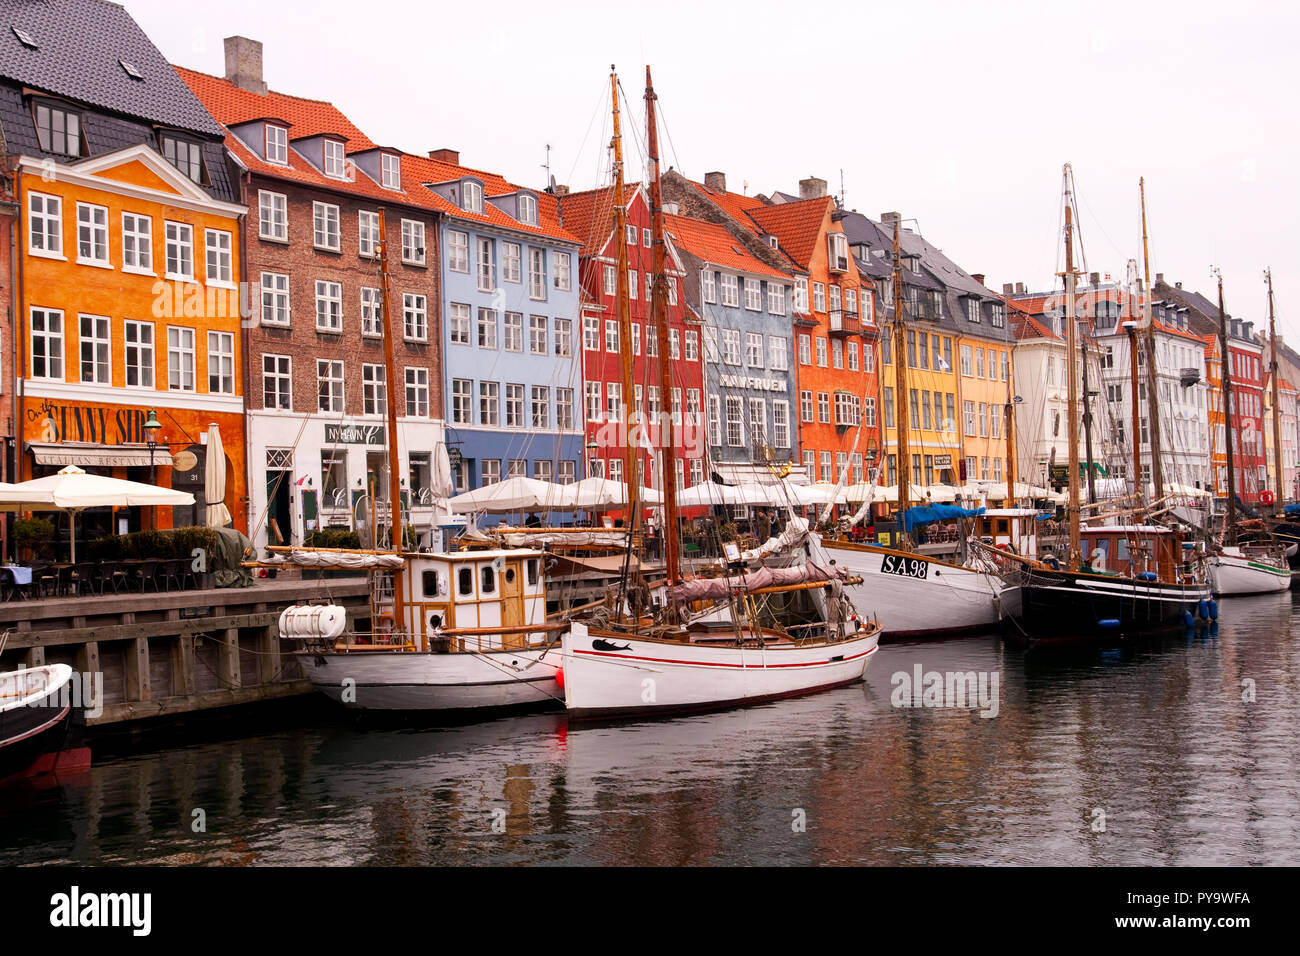 Nyhavn, one of the most touristic locations in Copenhagen, Denmark Stock Photo